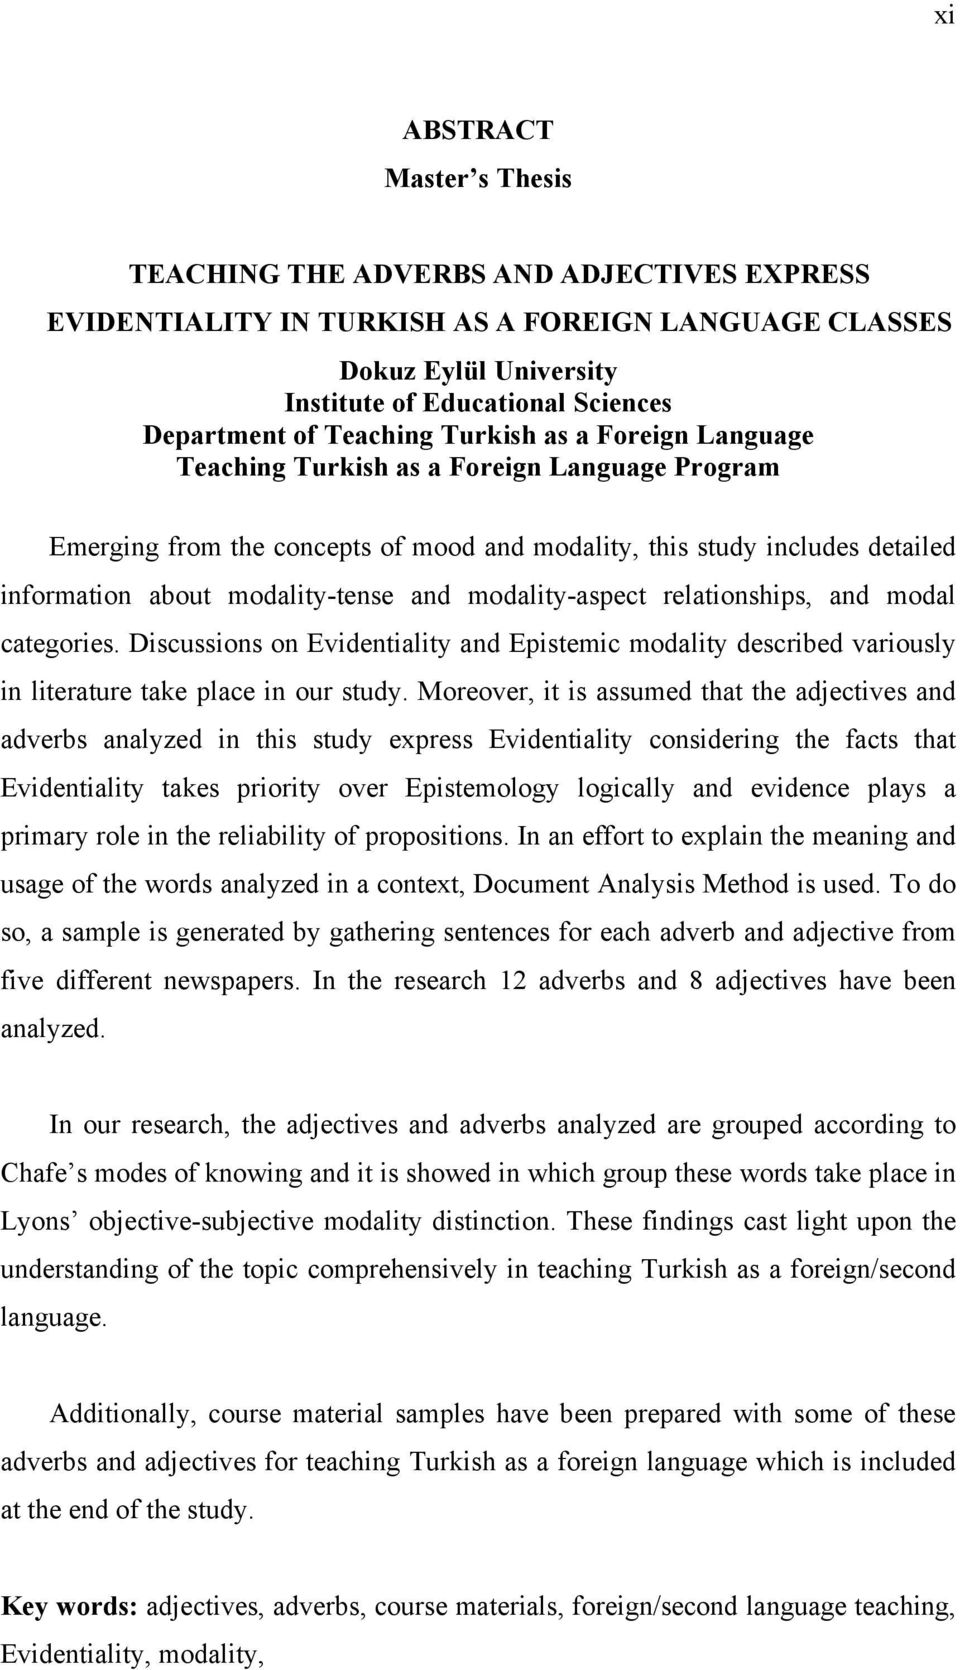 and modality-aspect relationships, and modal categories. Discussions on Evidentiality and Epistemic modality described variously in literature take place in our study.